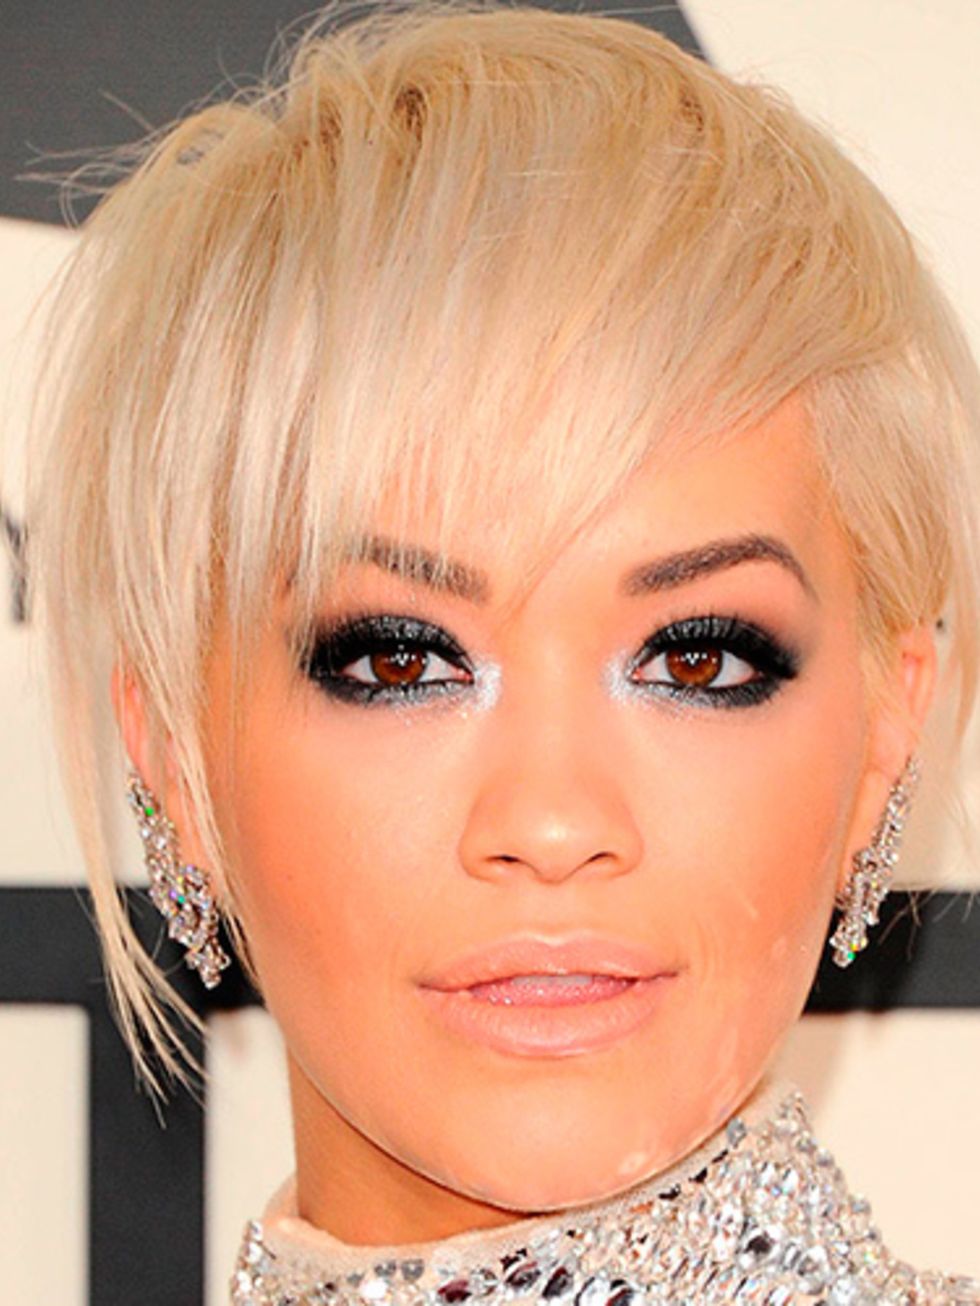 <p><a href="http://www.elleuk.com/fashion/celebrity-style/rita-ora-s-best-looks-from-hip-hop-throwback-90s-high-street-to-red-carpet-glamourous-looks">Rita Ora</a></p>